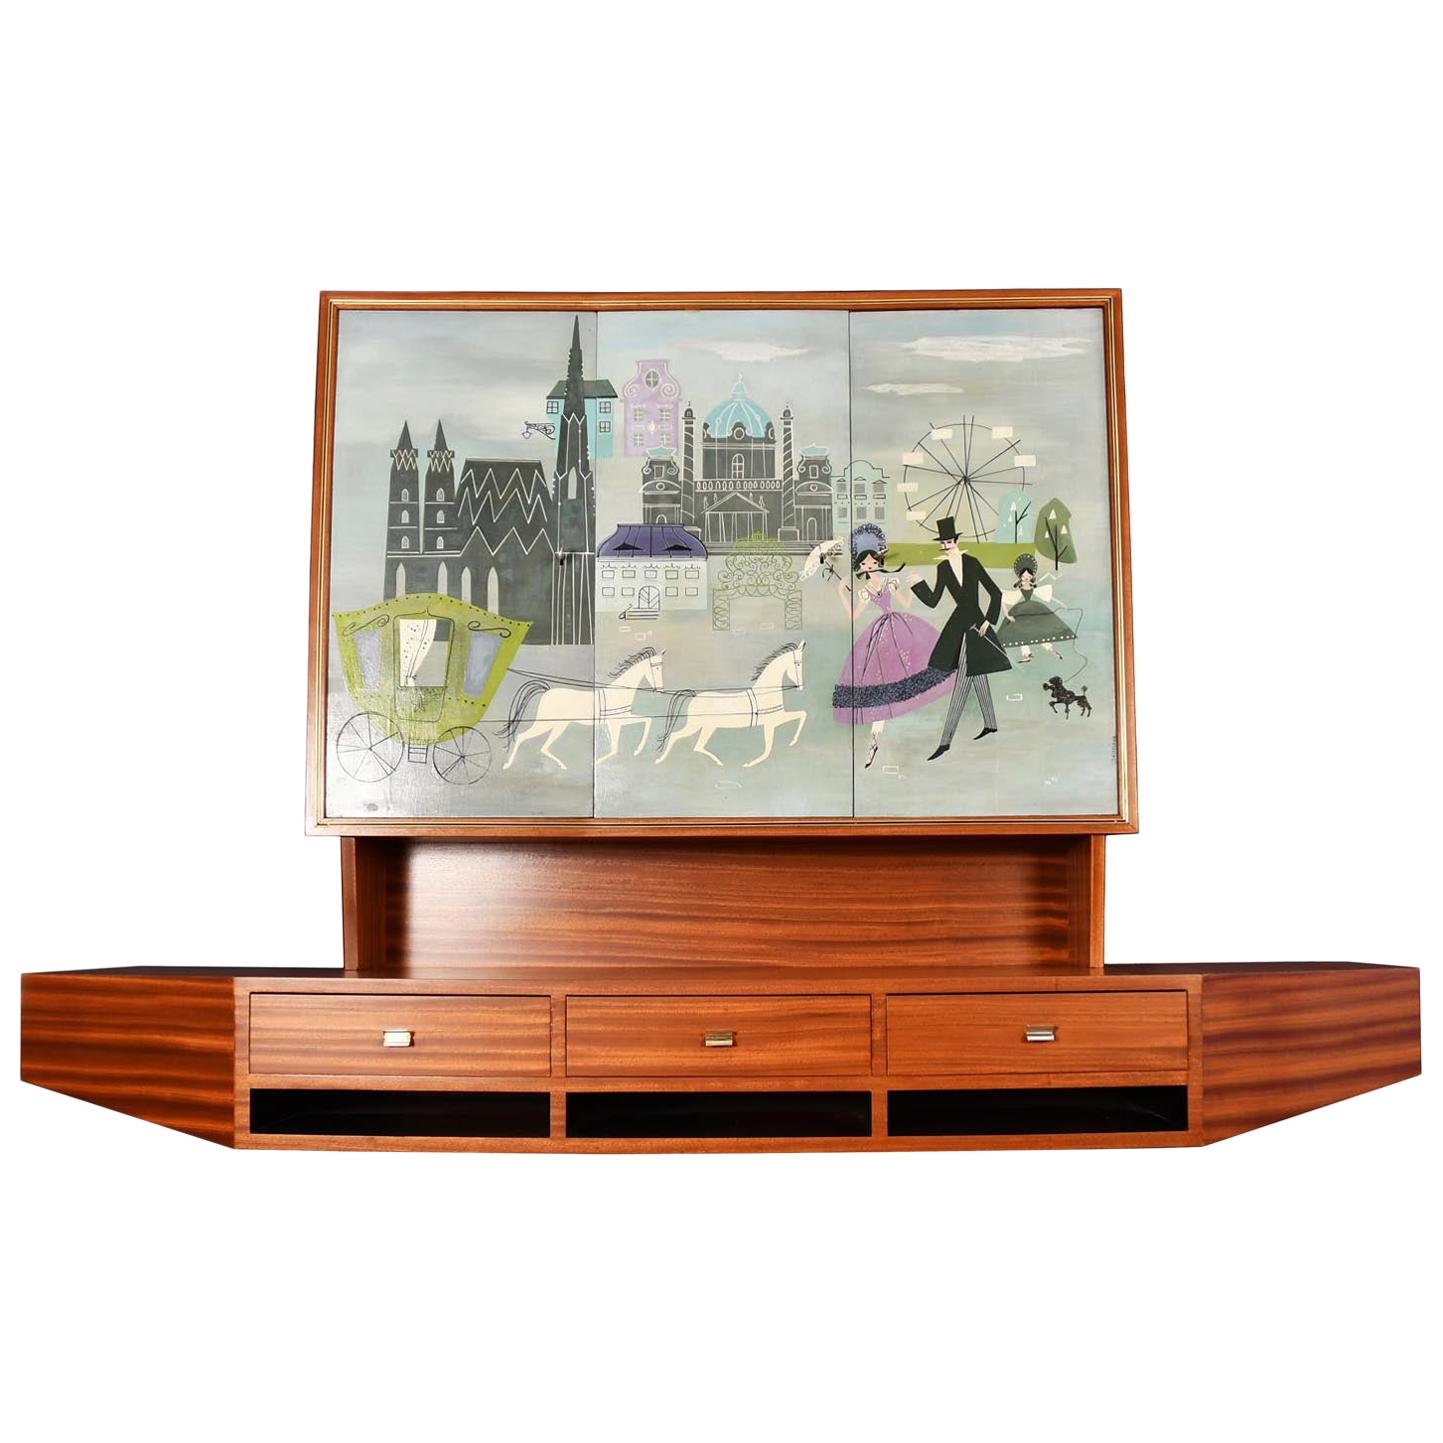 Mahogany Hanging Bar Austria 1950s Midcentury Cabinet Painting by Jahnass